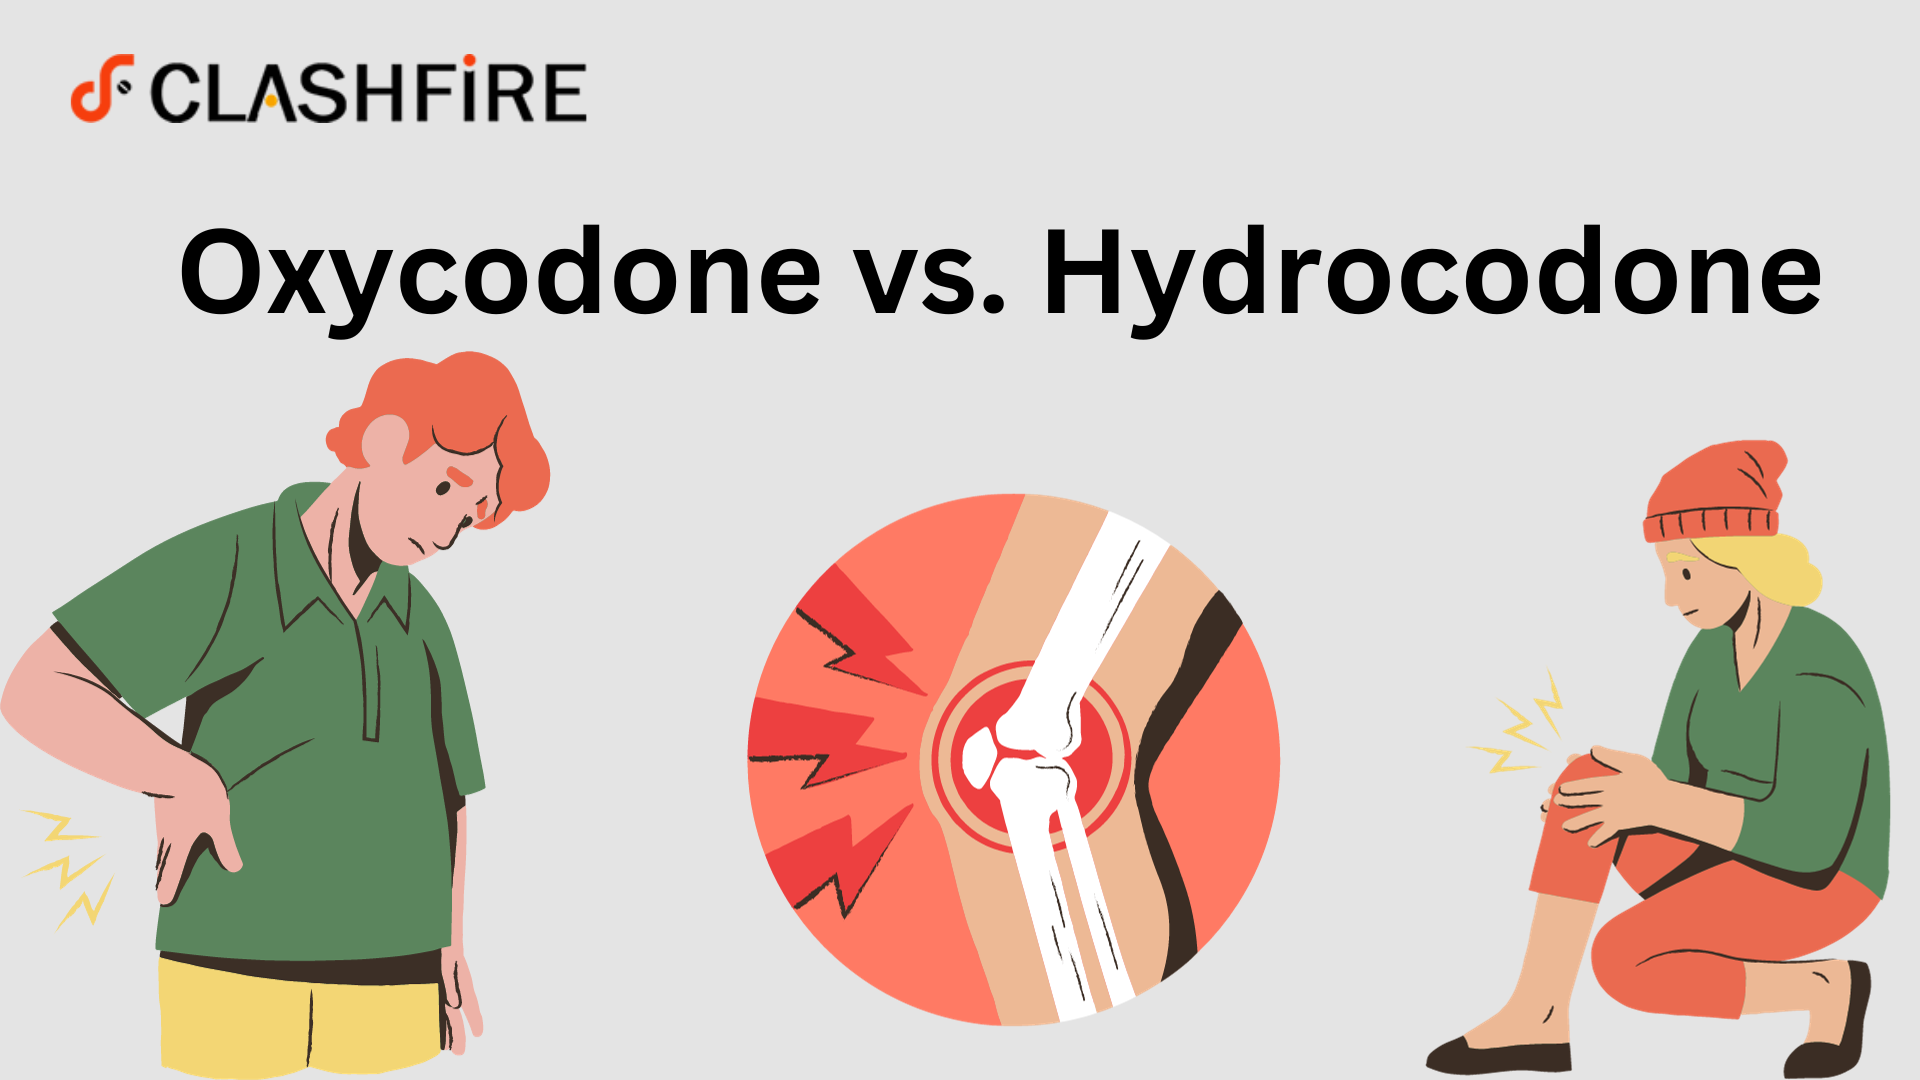 Oxycodone vs. Hydrocodone for acute and chronic pain relief 2